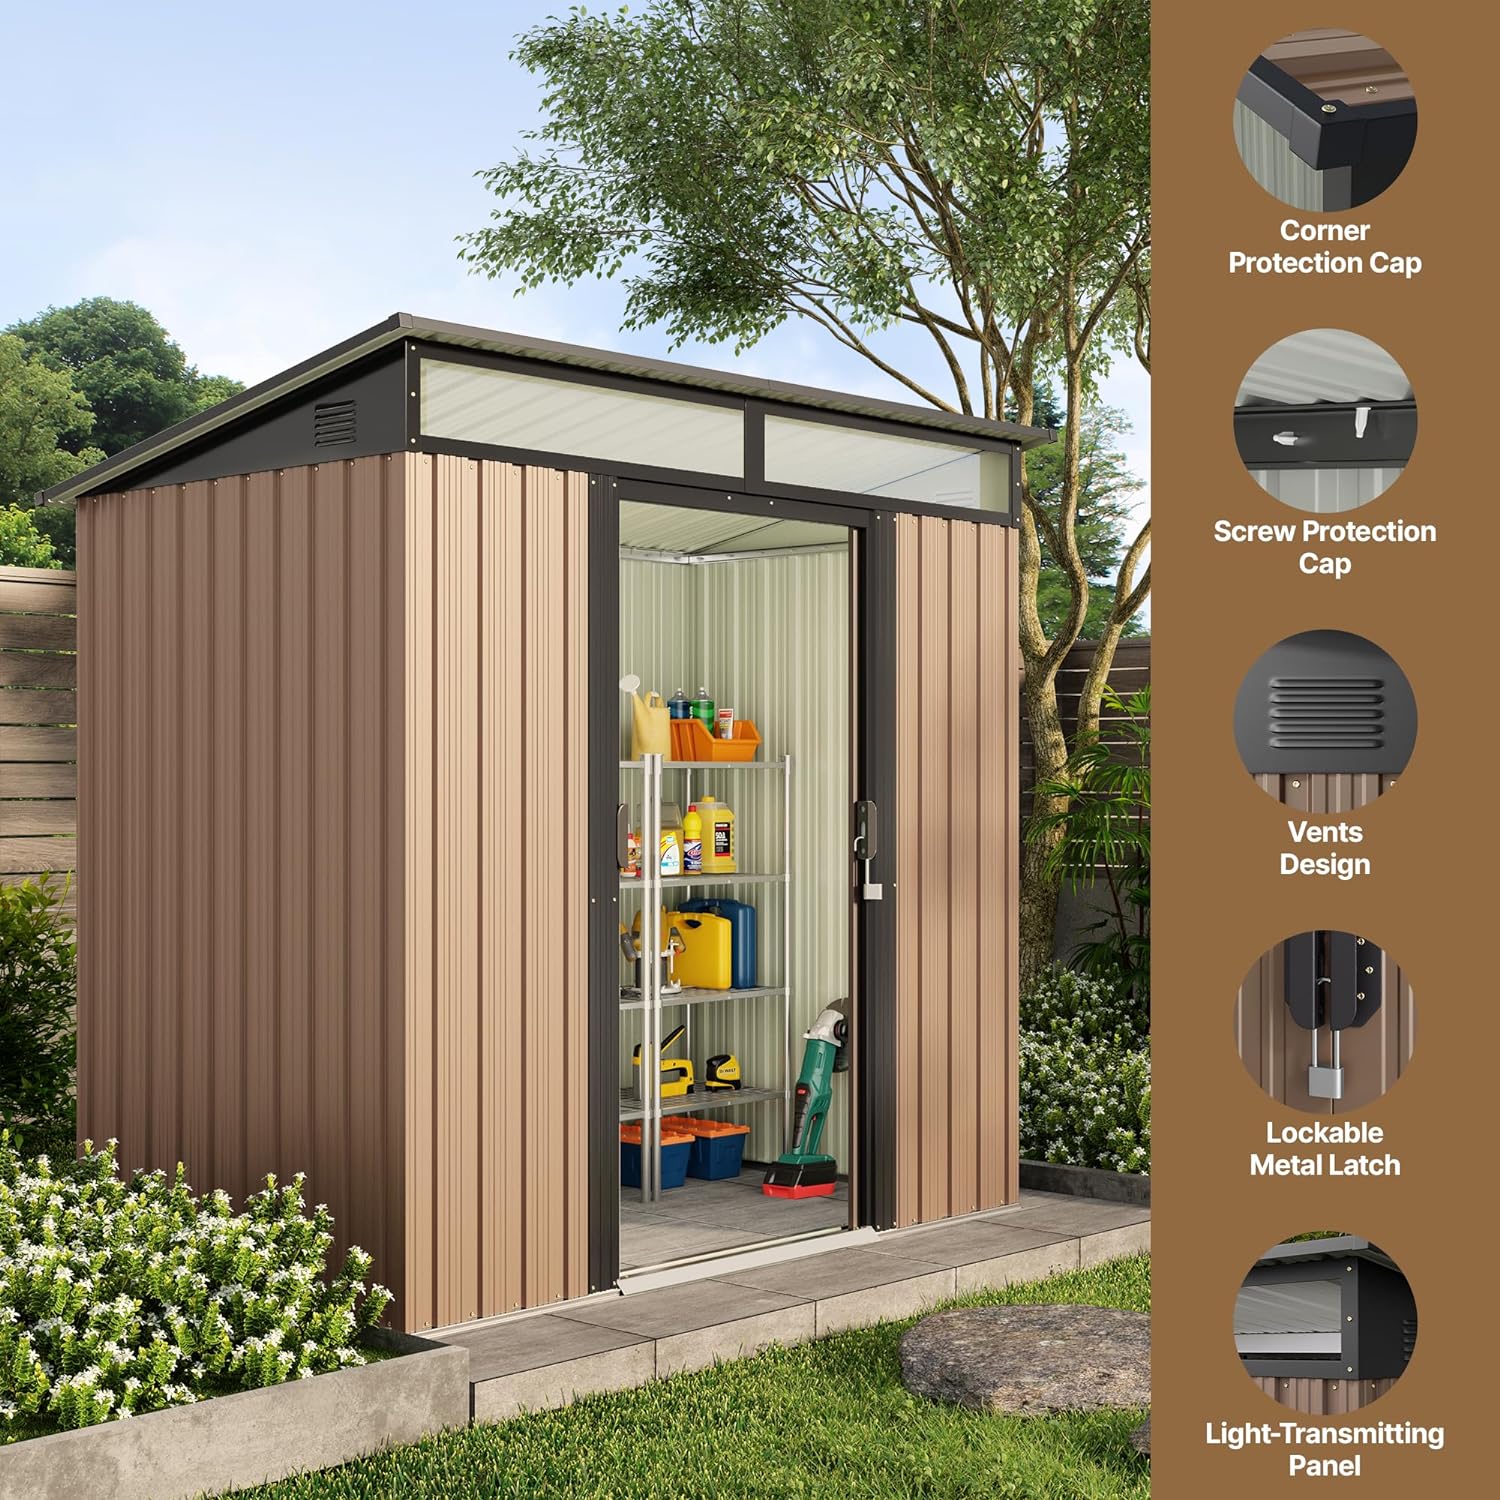 Gizoon Outdoor Storage Shed Review 